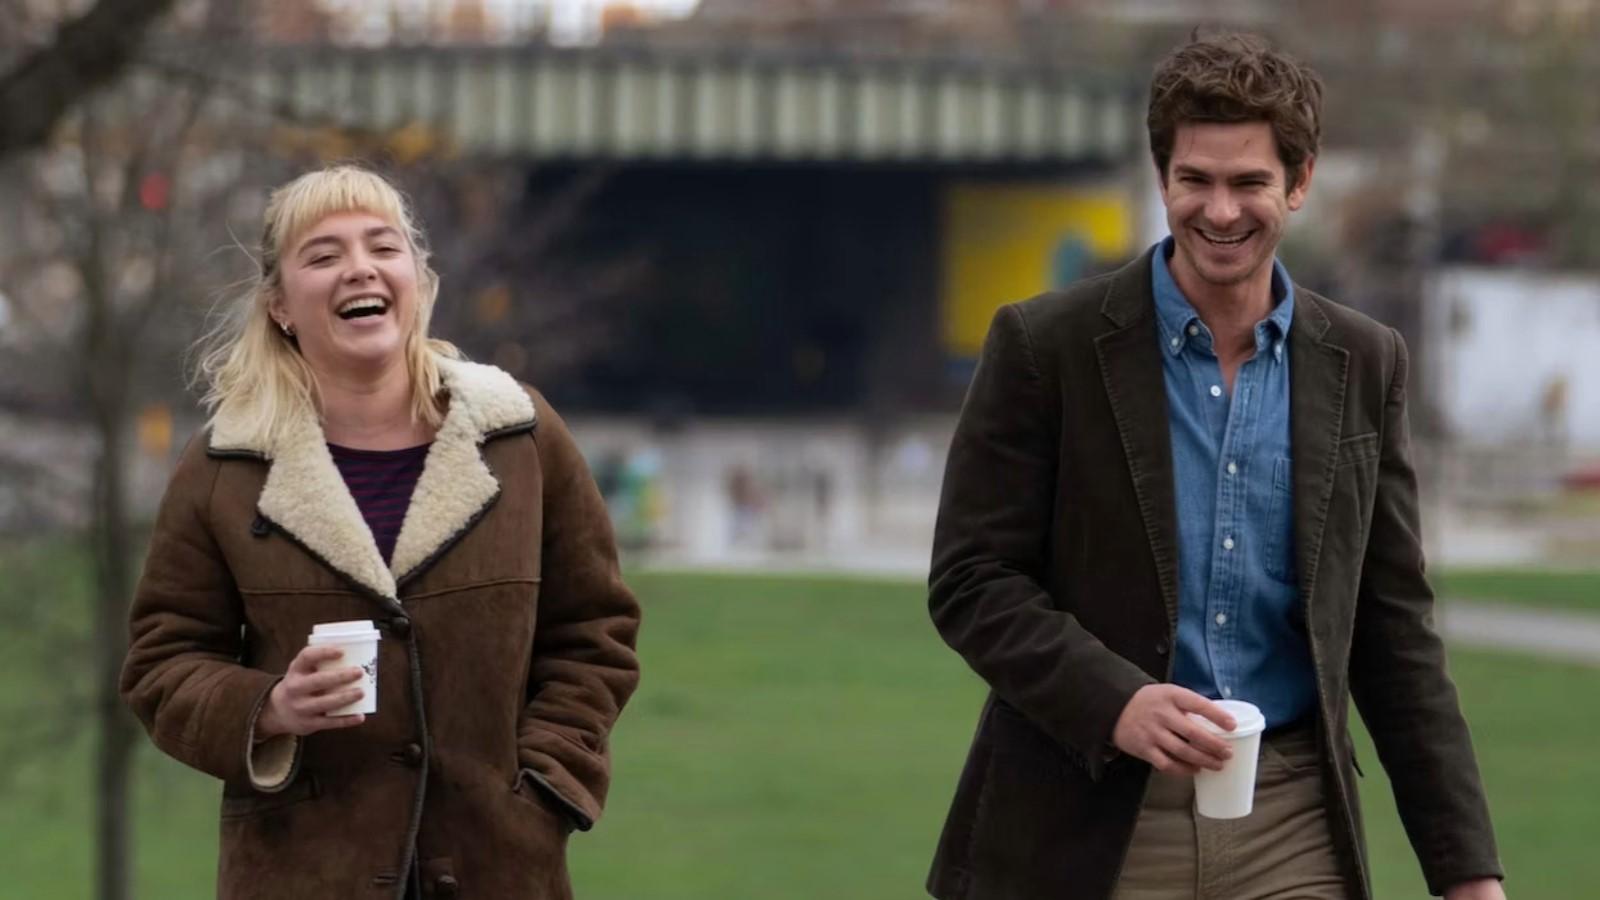 Florence Pugh and Andrew Garfield as Tobias and Almut in We Live in Time, walking through the park and laughing